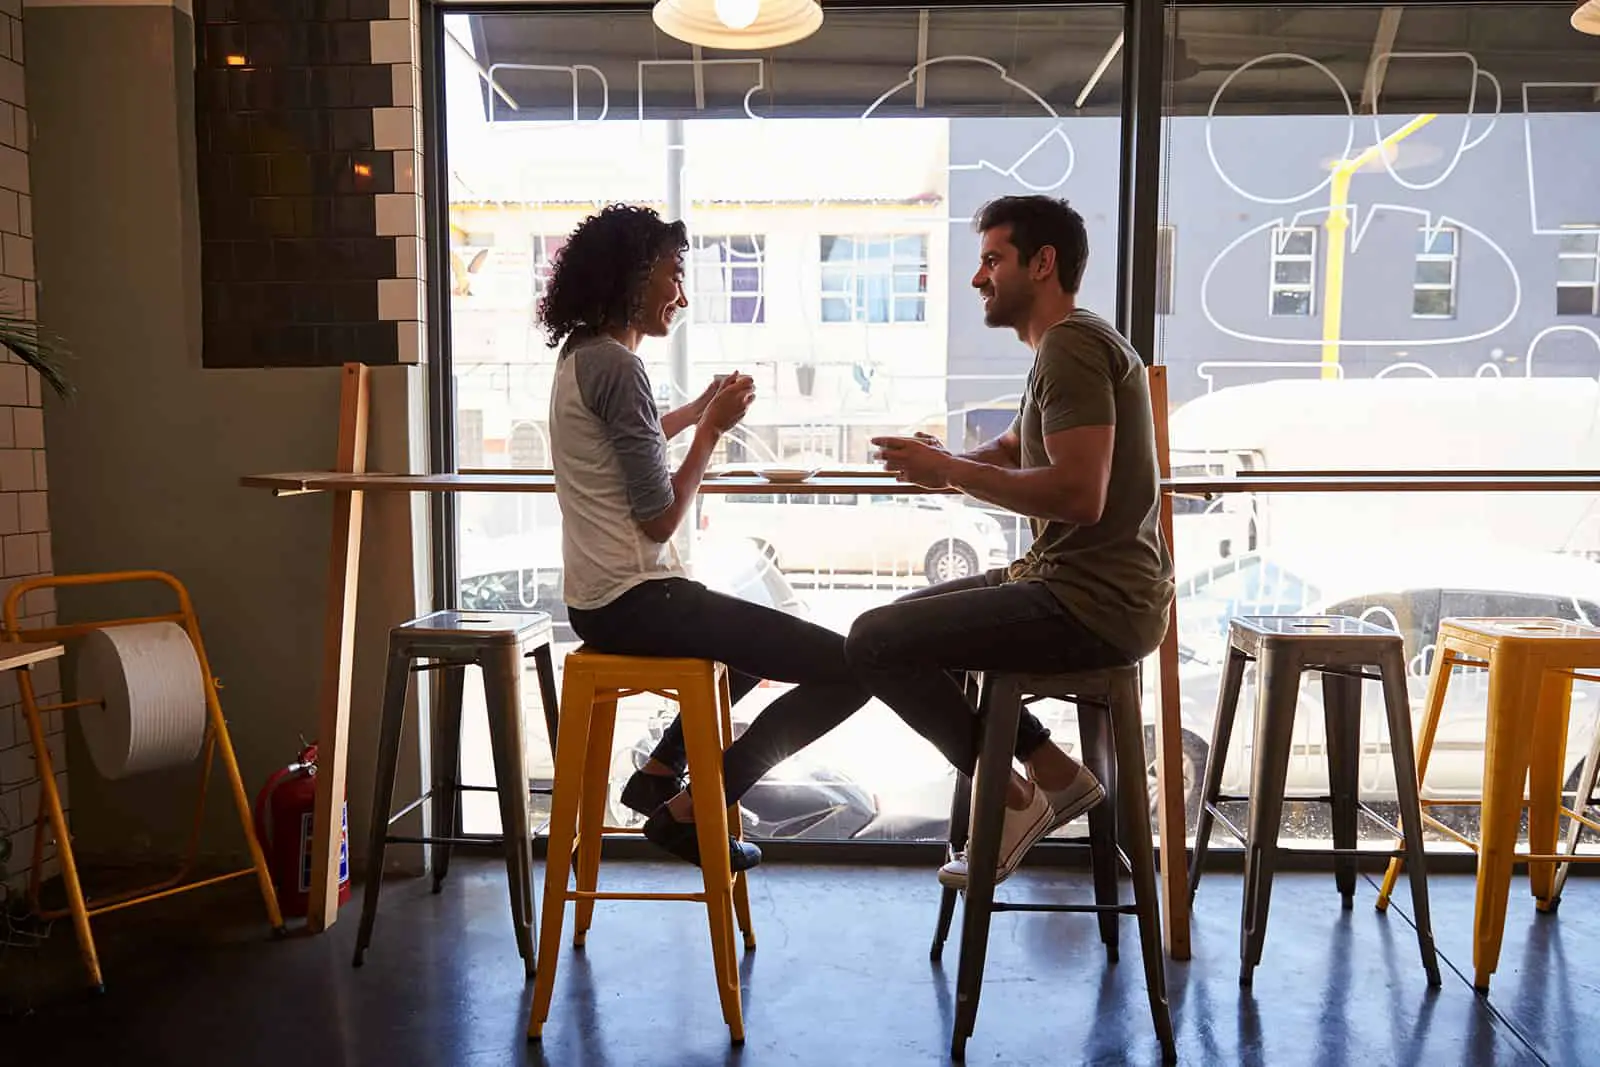 Dating Questions to Ask to Start a Conversation With a Guy In The Cafe